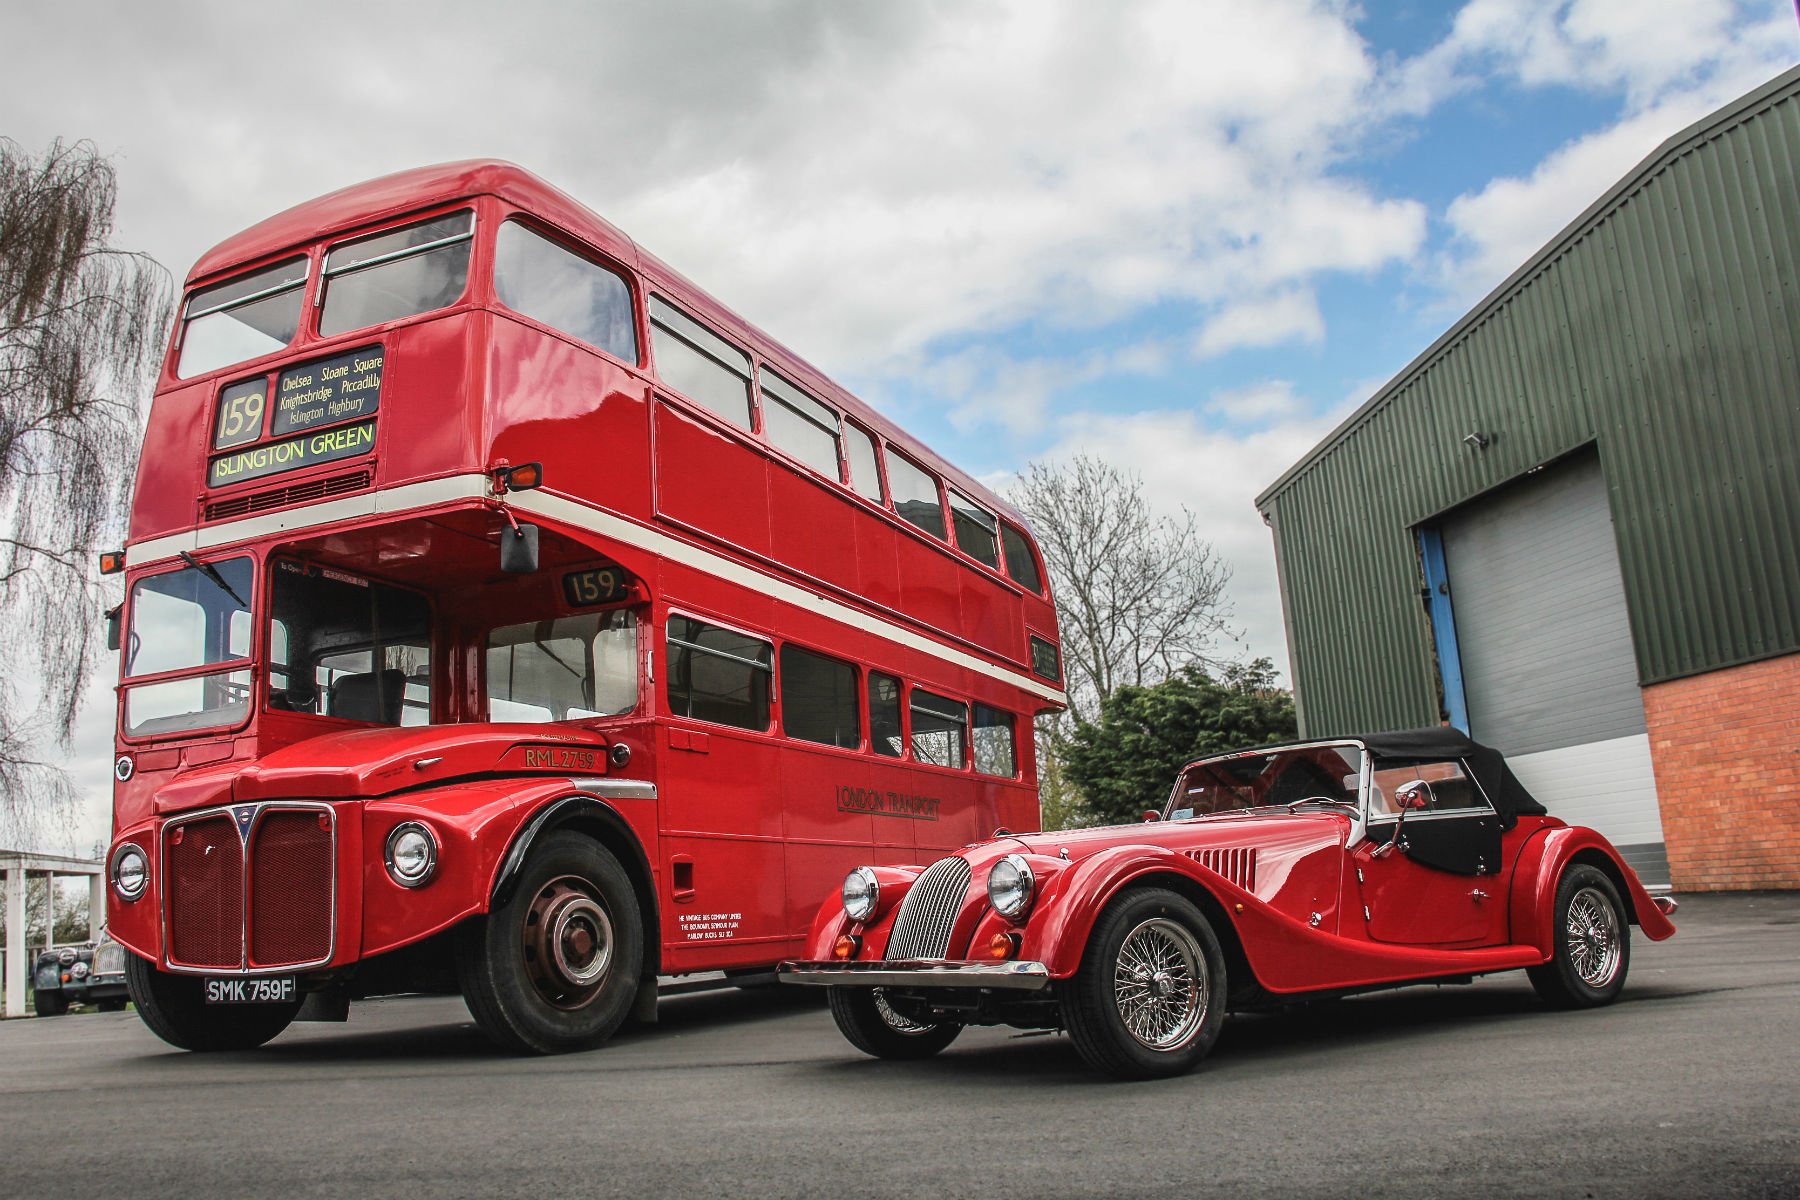 Morgan is restoring an old bus to celebrate 50 years of the Plus 8